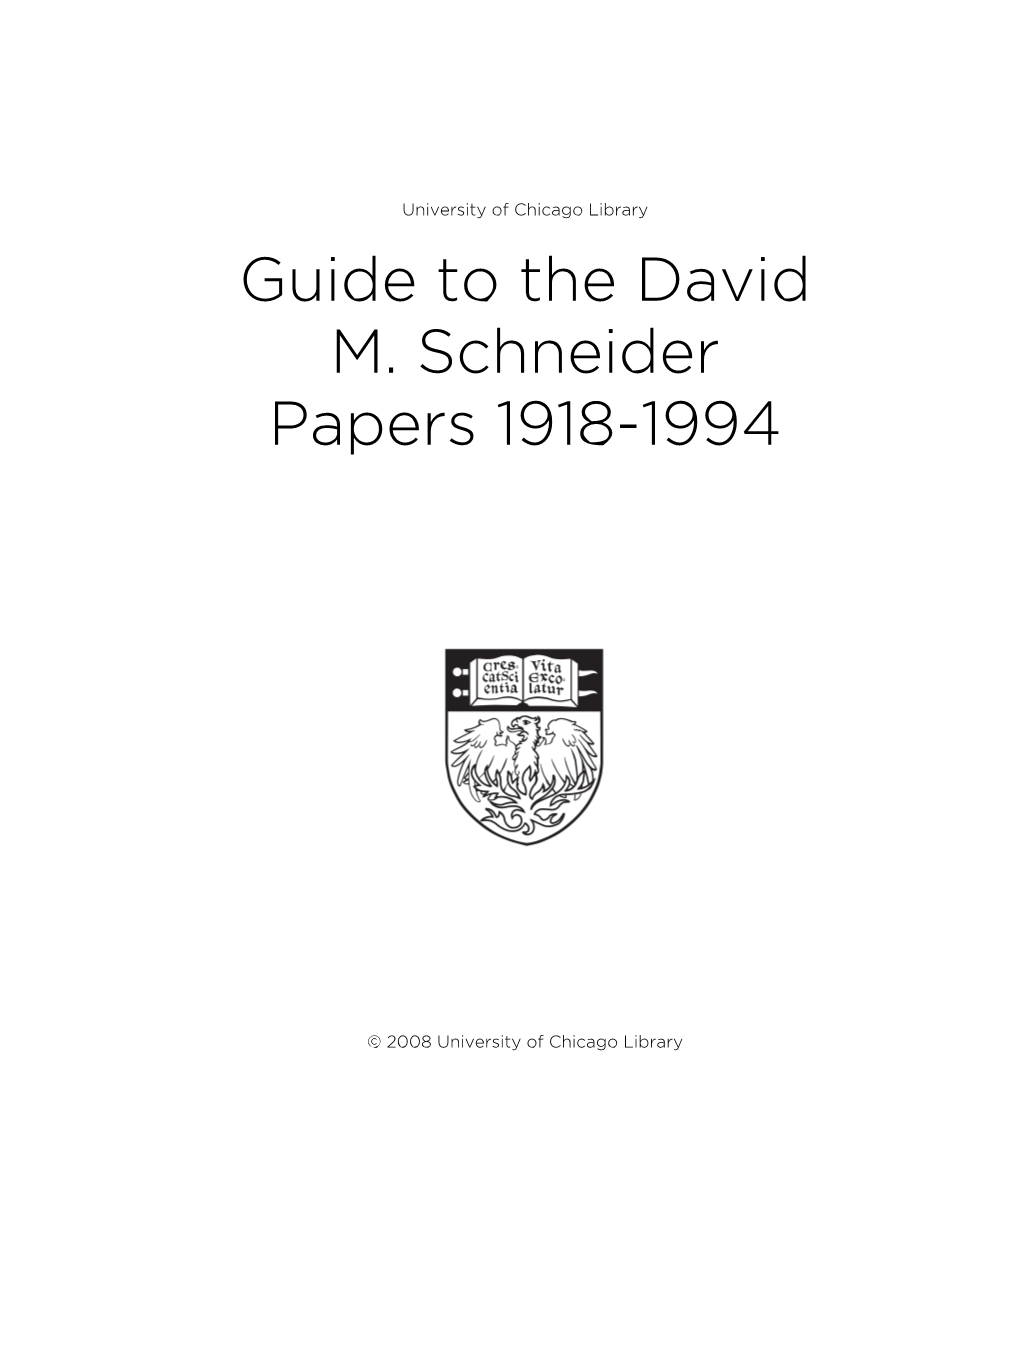 Guide to the David M. Schneider Papers 1918-1994